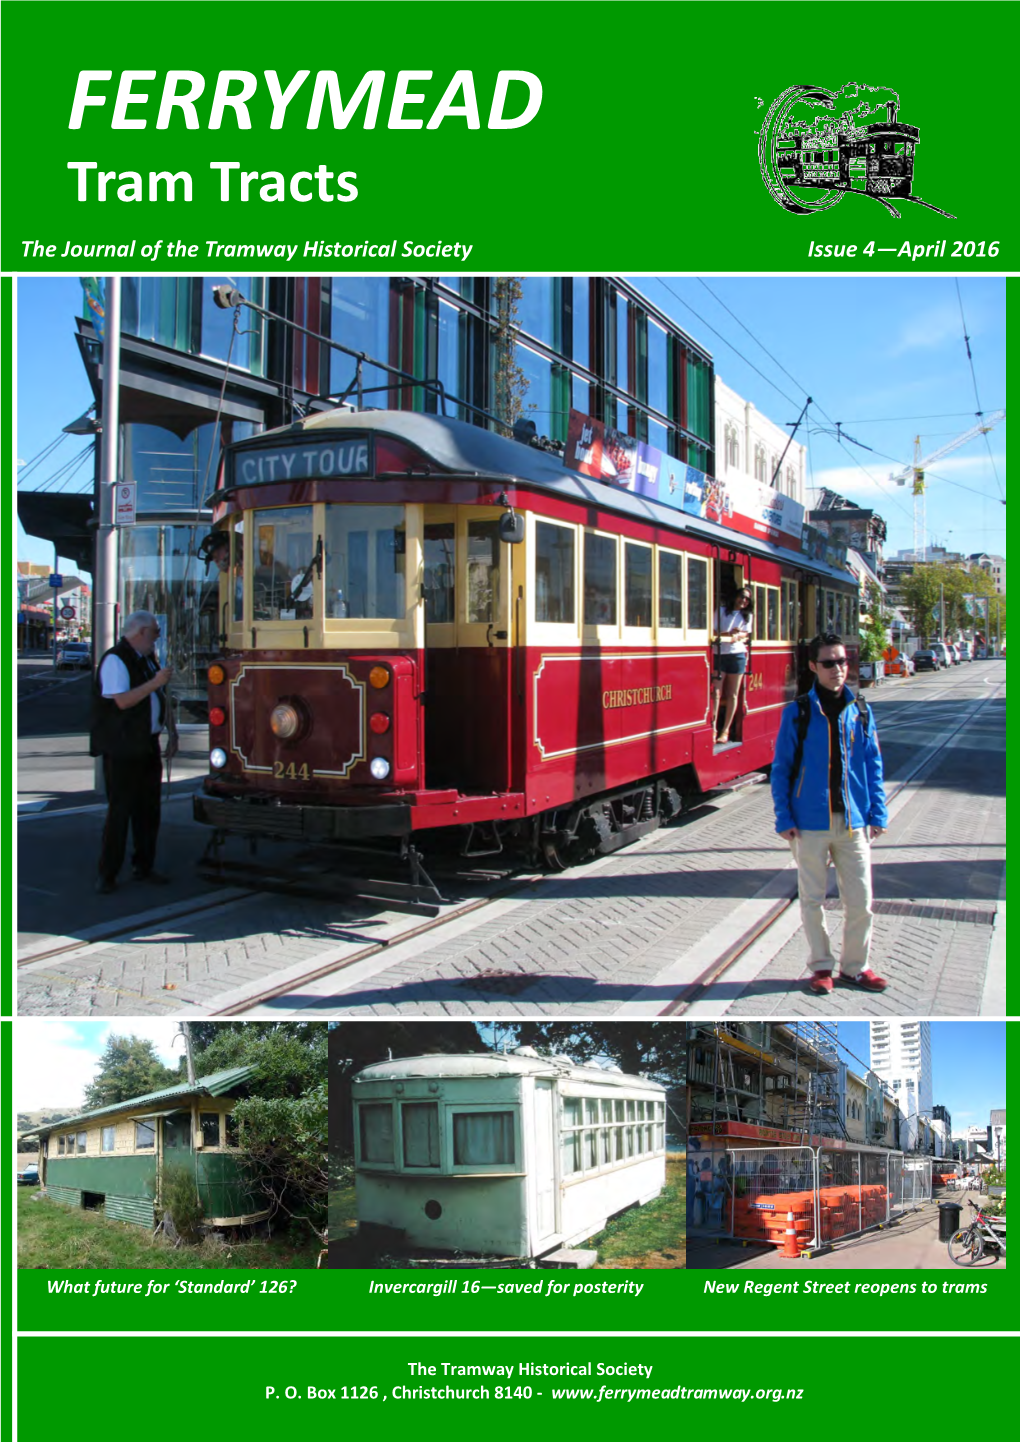 FERRYMEAD Tram Tracts the Journal of the Tramway Historical Society Issue 4—April 2016